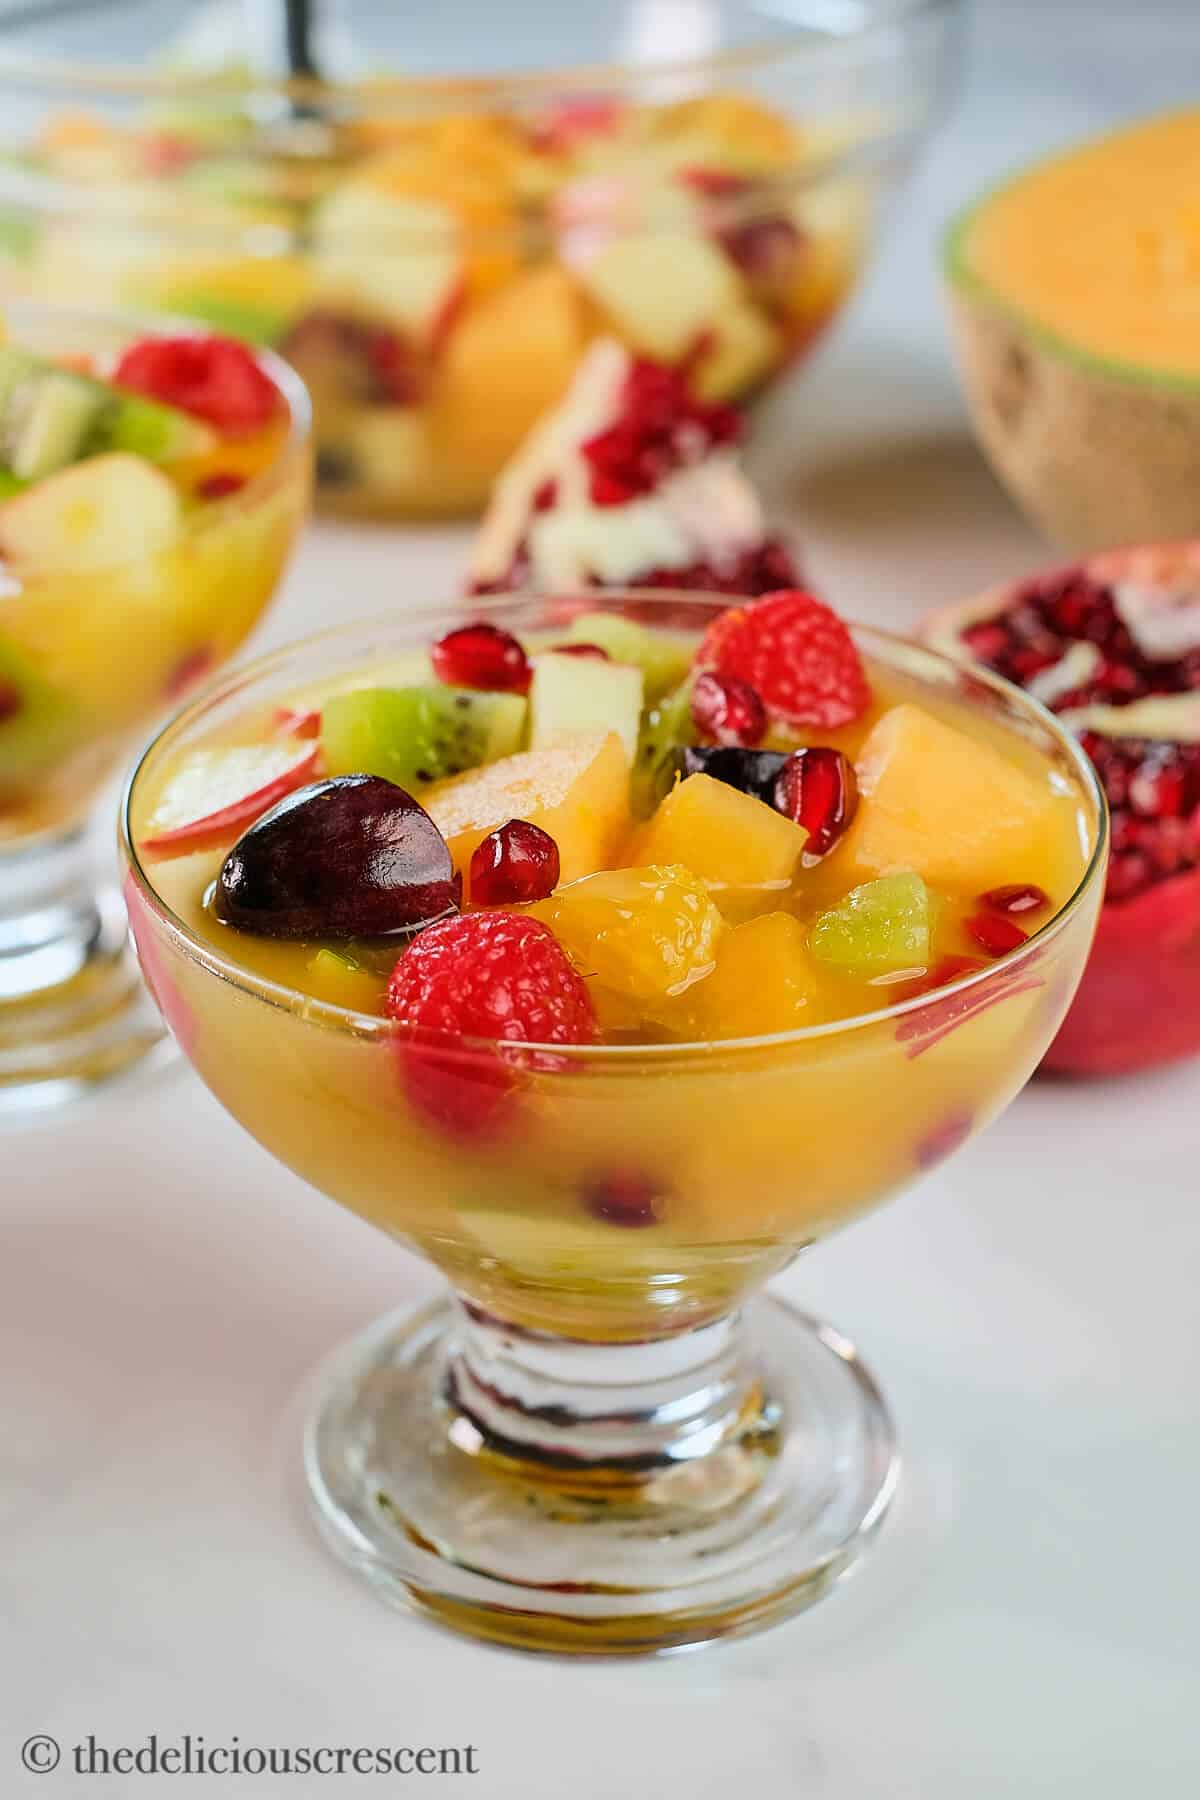 Easy Fruit Salad With Orange Juice - The Delicious Crescent